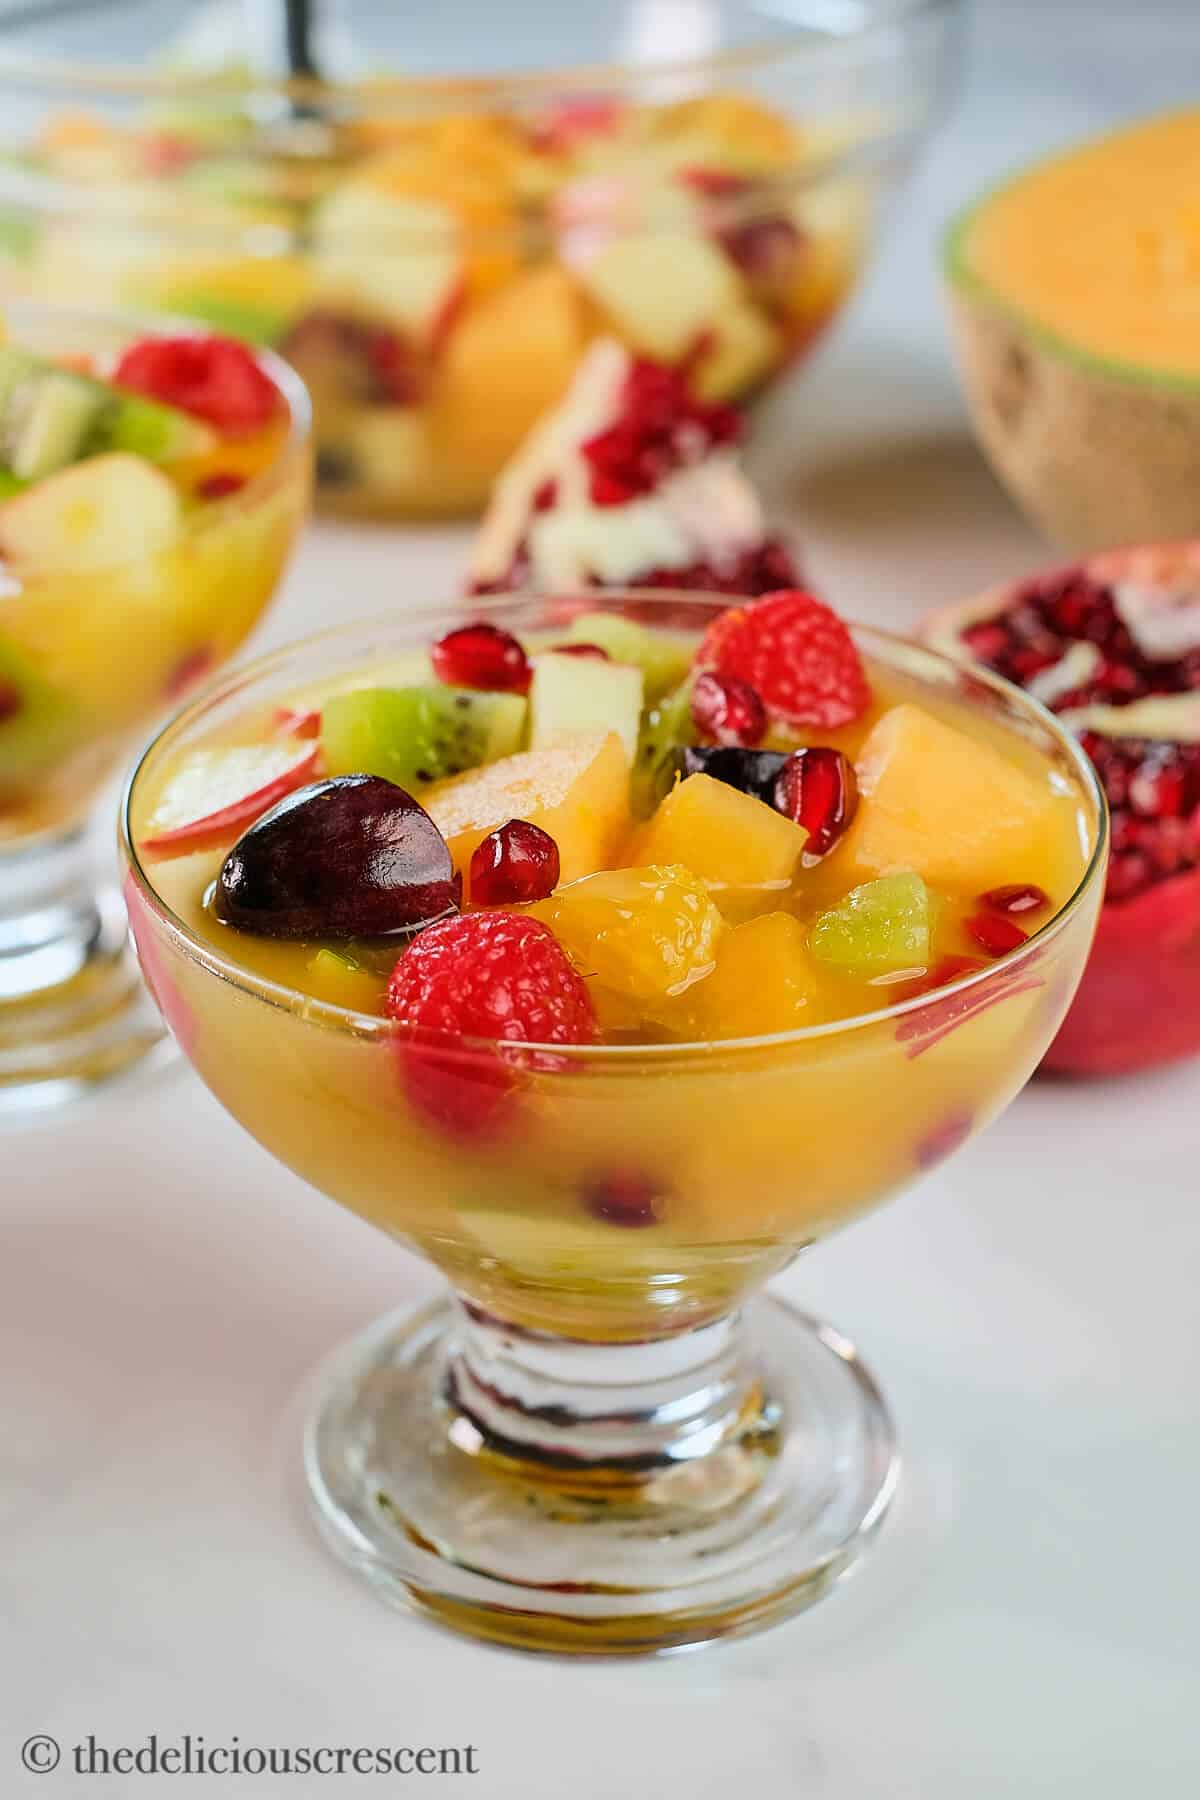 Easy Fruit Salad With Orange Juice - The Delicious Crescent